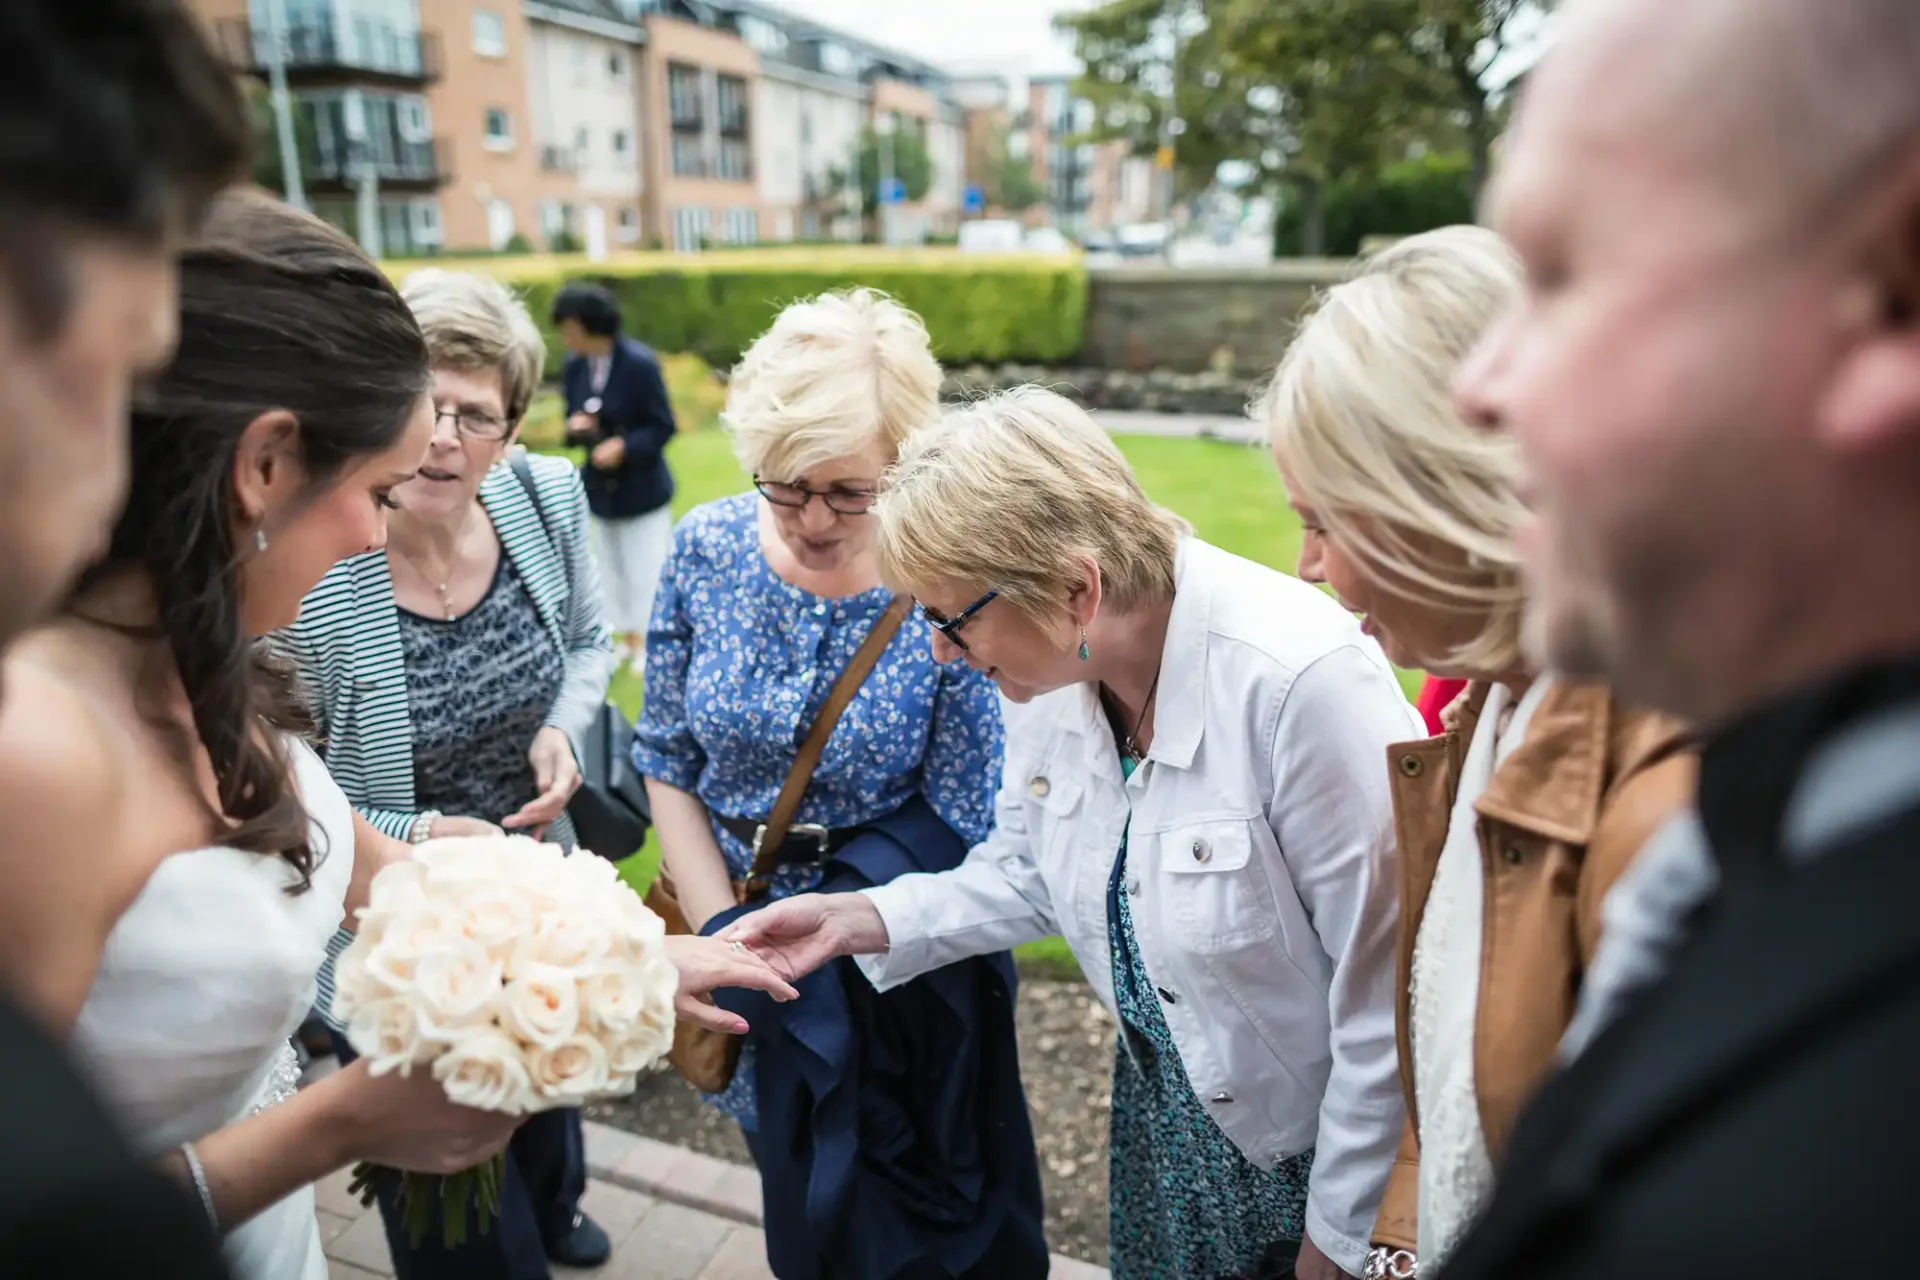 A bride shows her bouquet to a group of admiring guests at an outdoor wedding function.